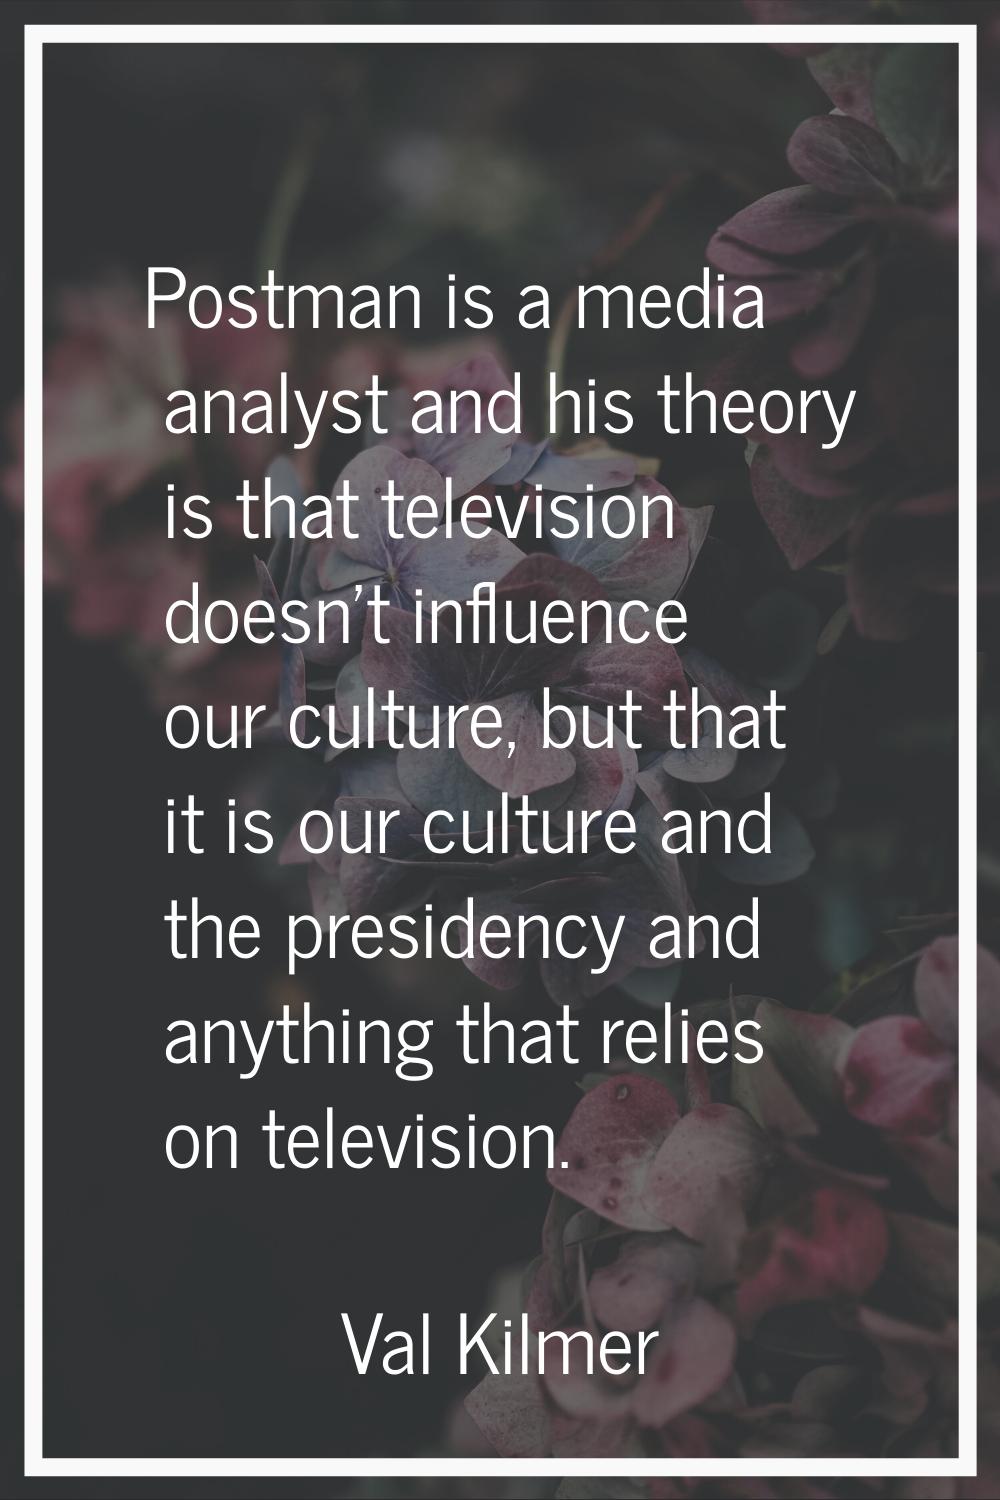 Postman is a media analyst and his theory is that television doesn't influence our culture, but tha